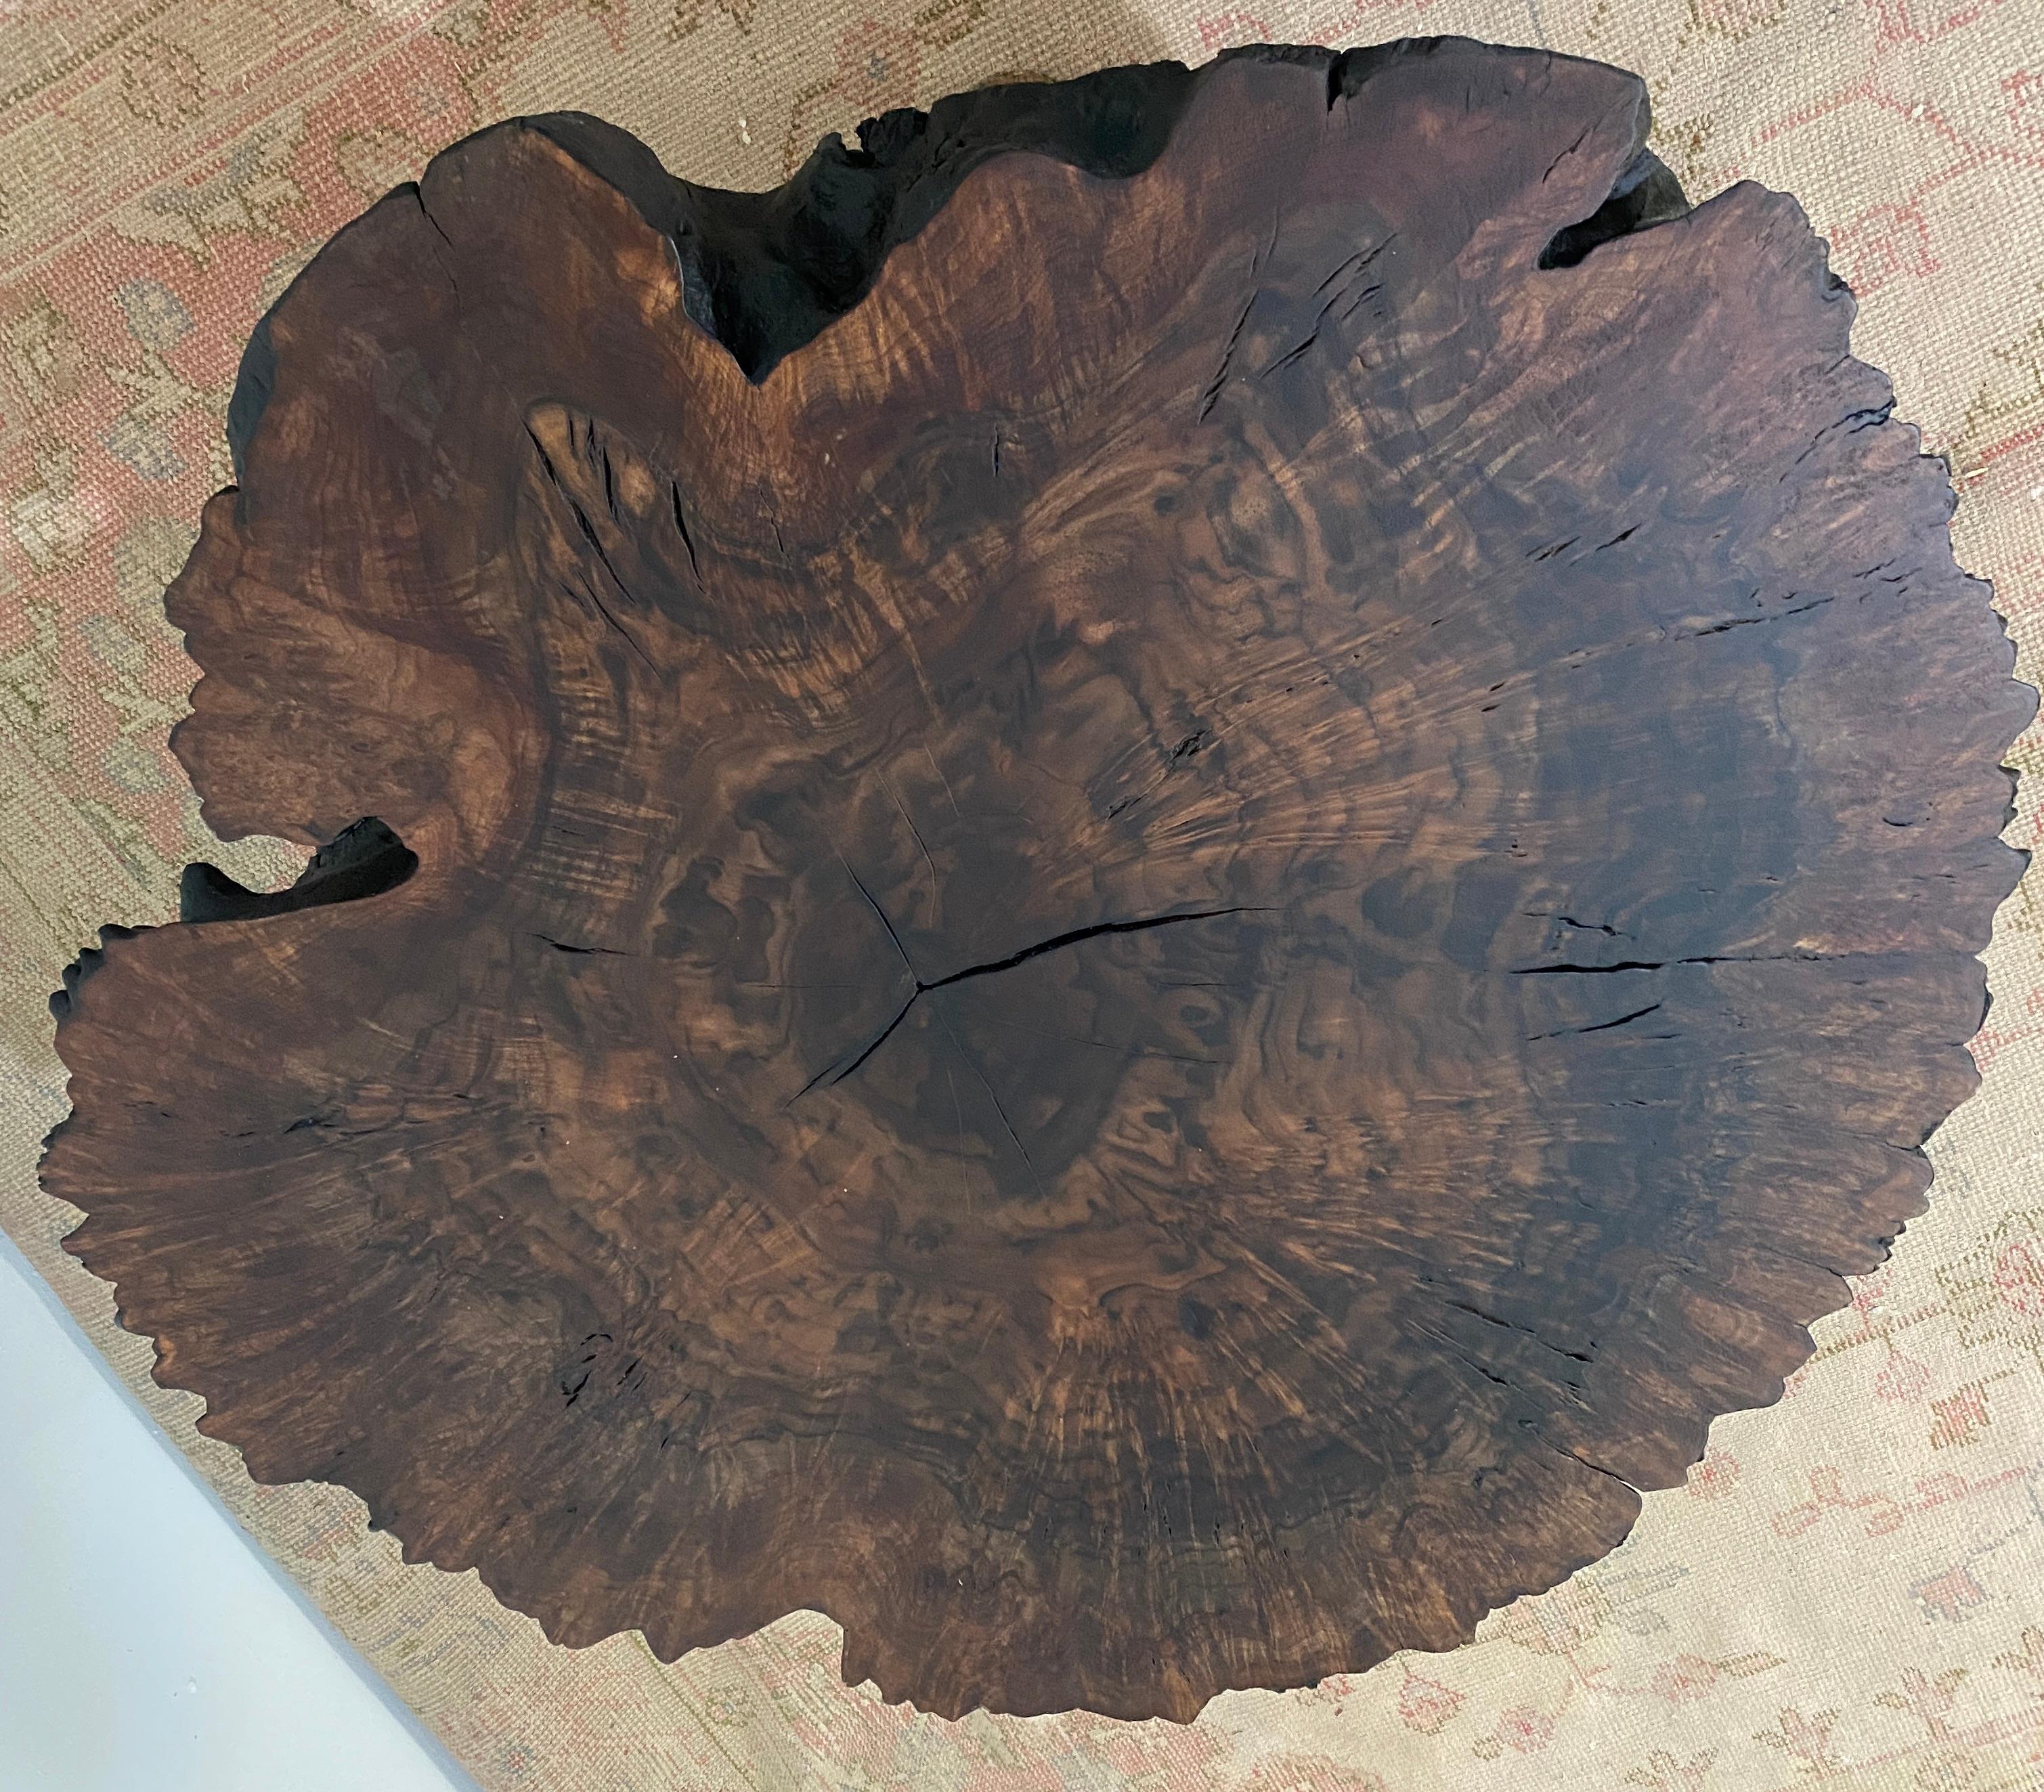 These one of a kind indiginous rugged primeval burl tables are of veritable vitality due to their
naturalistic form. We retained the bark sub-strata which gives the table it's rough texture. The
shell has been finished with a special lacquer over